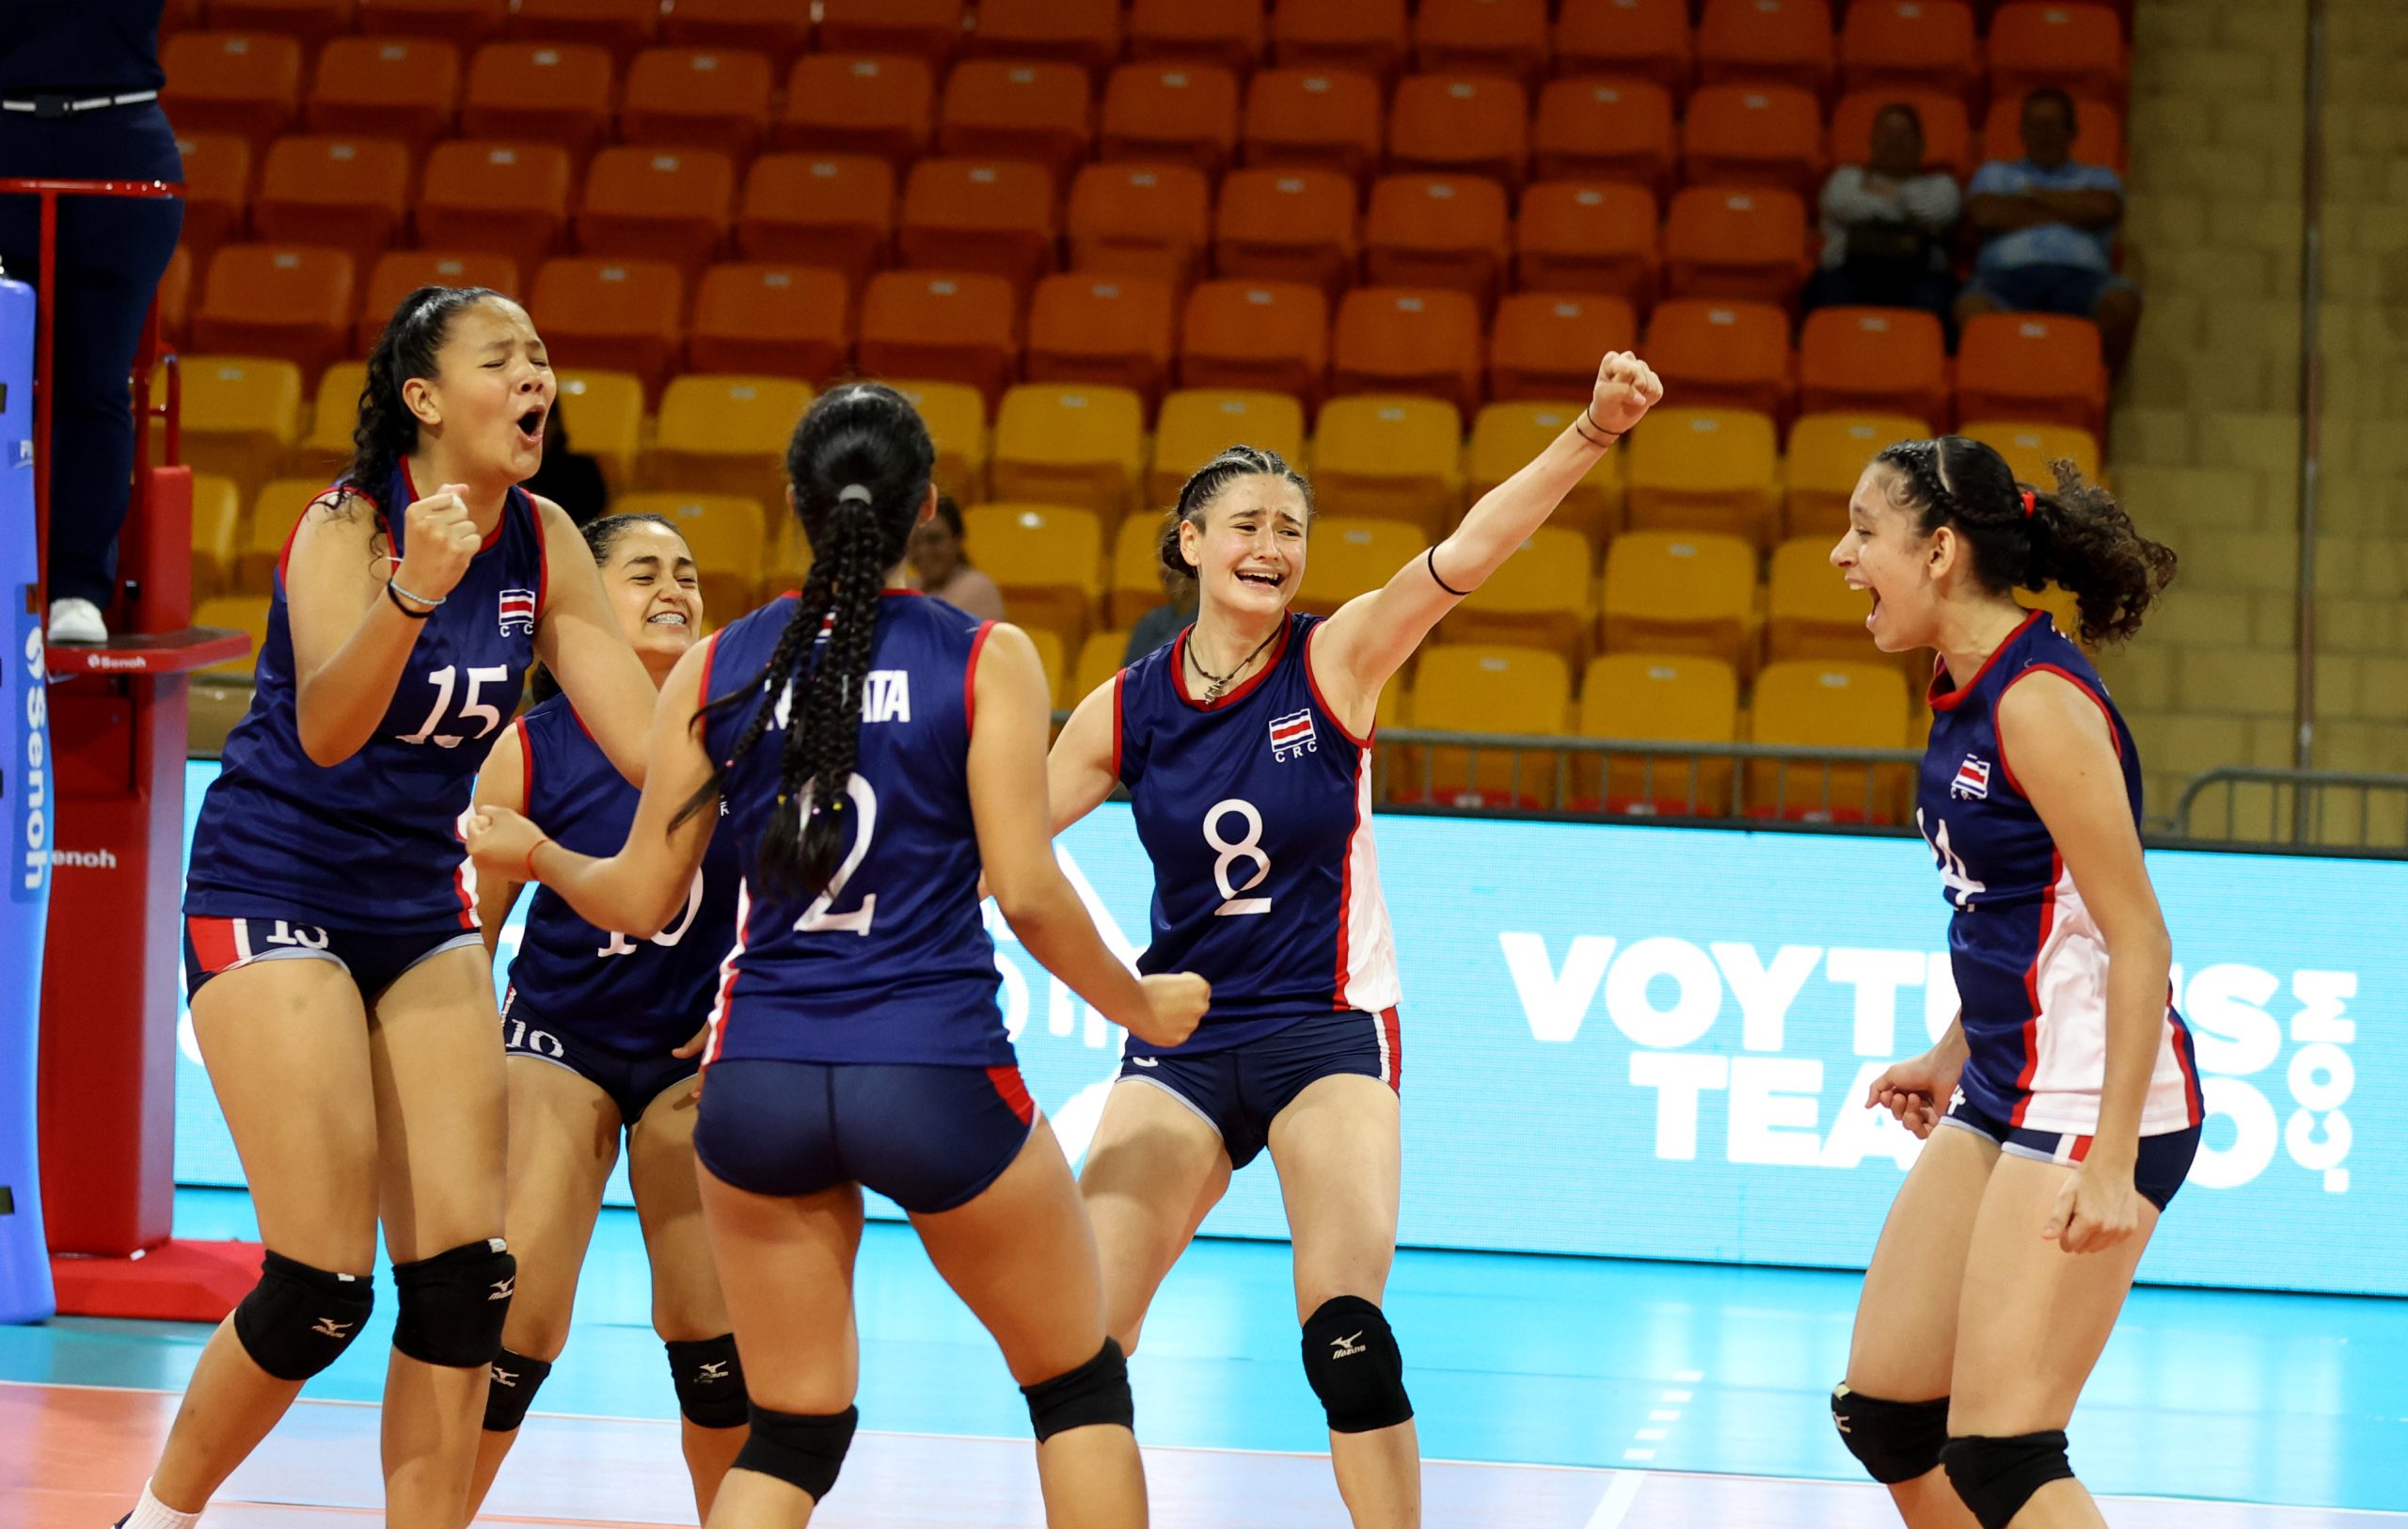 Costa Rica causes major upset to Dominican Republic and moves into semifinals